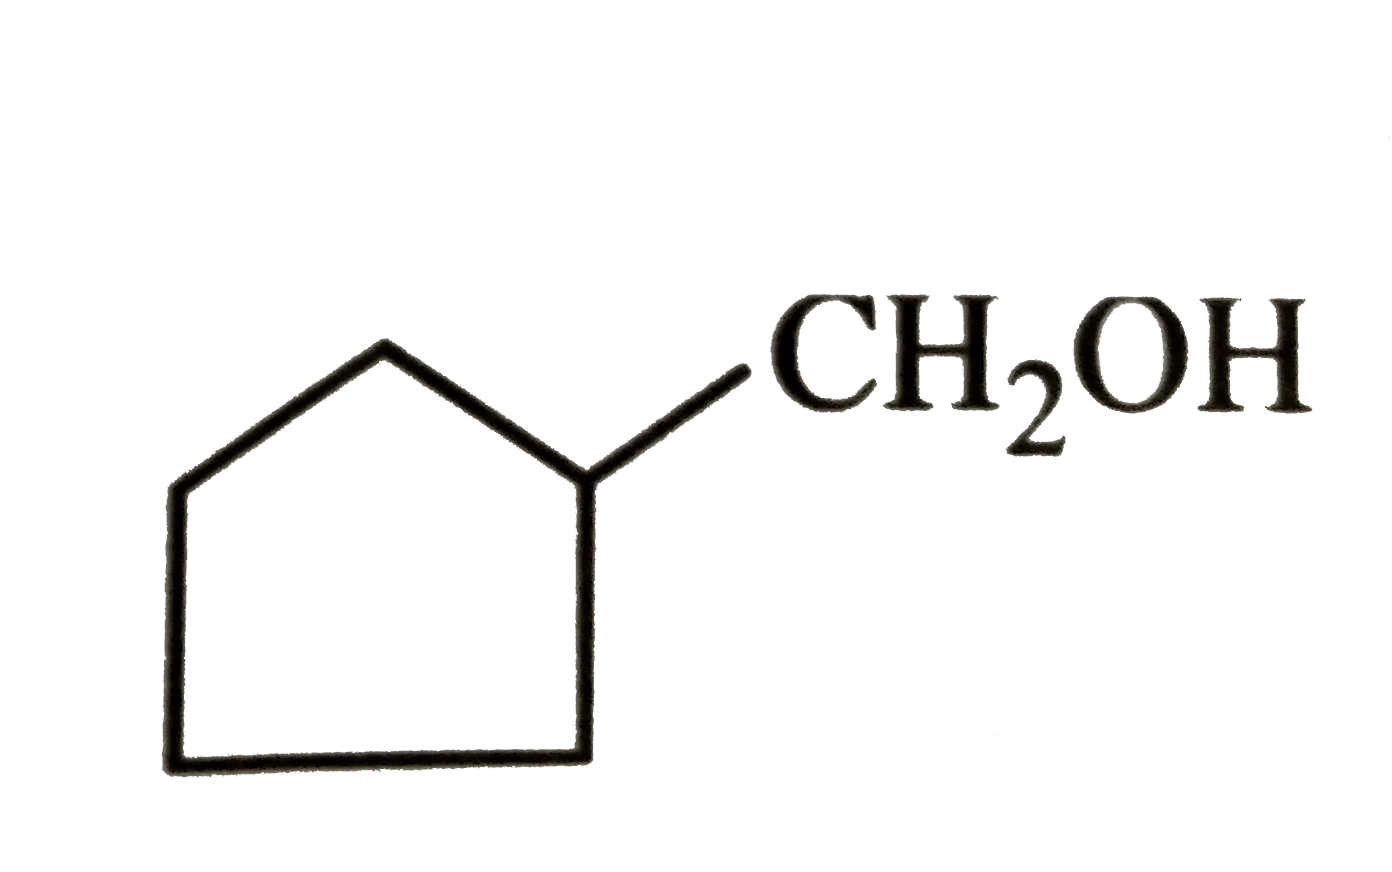 Give the products when  is oxidised using following reagents :   (i) K(2)Cr(2)O(7) //H(2)SO(4)   (ii) CrO(3) // H(2)SO(4) ,acetone   (iii) CrO(3)//Pyridine   (iv) Pyridinium chlorochromate